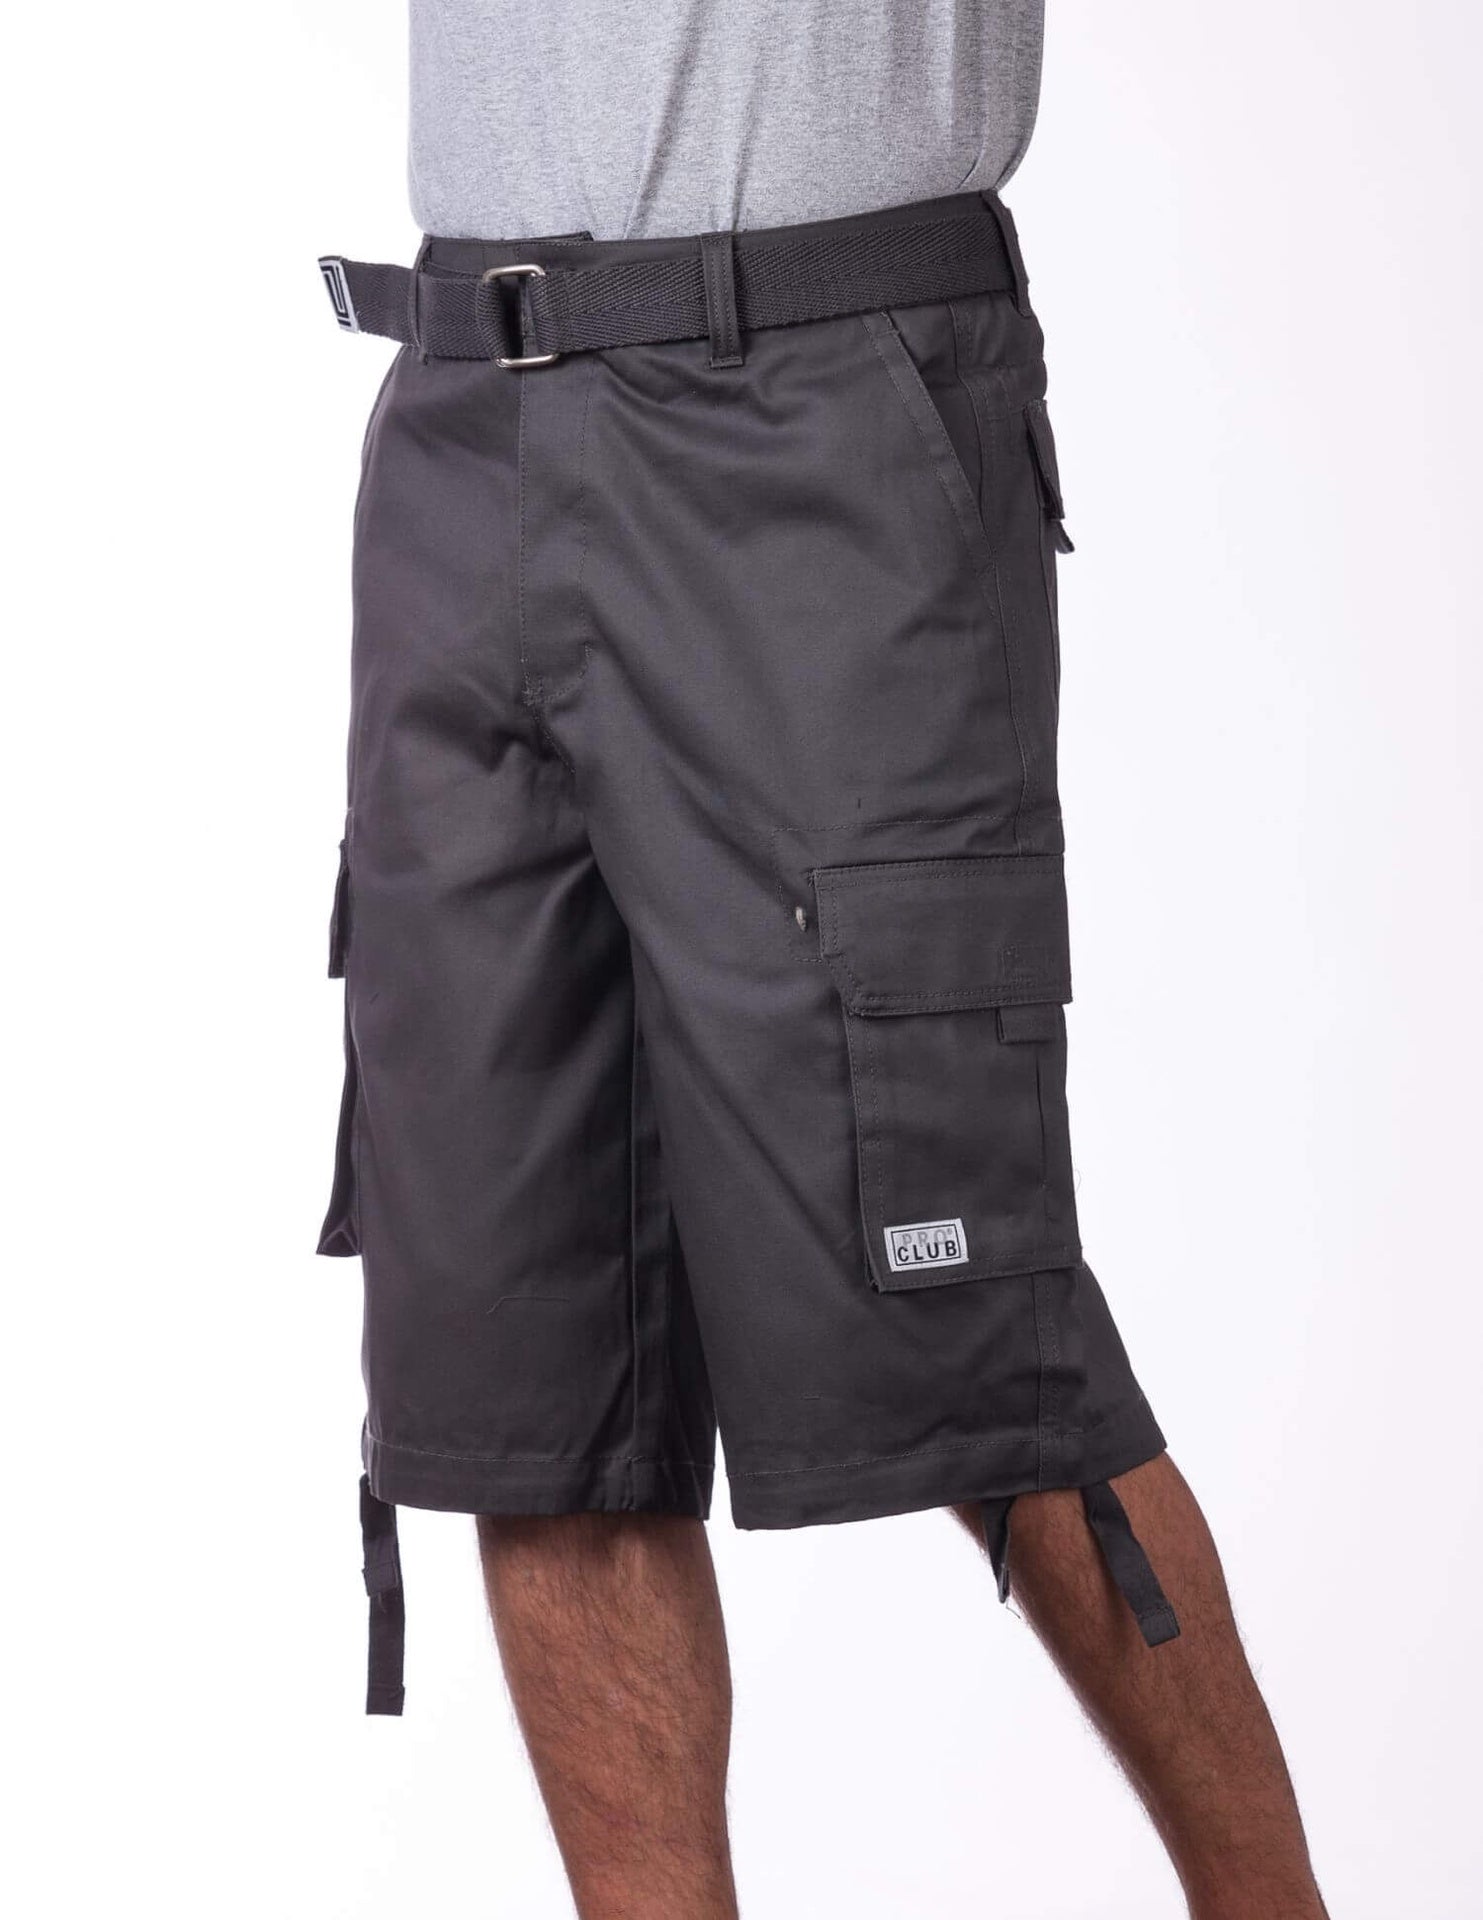 Pro Club Twill Cargo Shorts with Belt - CHARCOAL